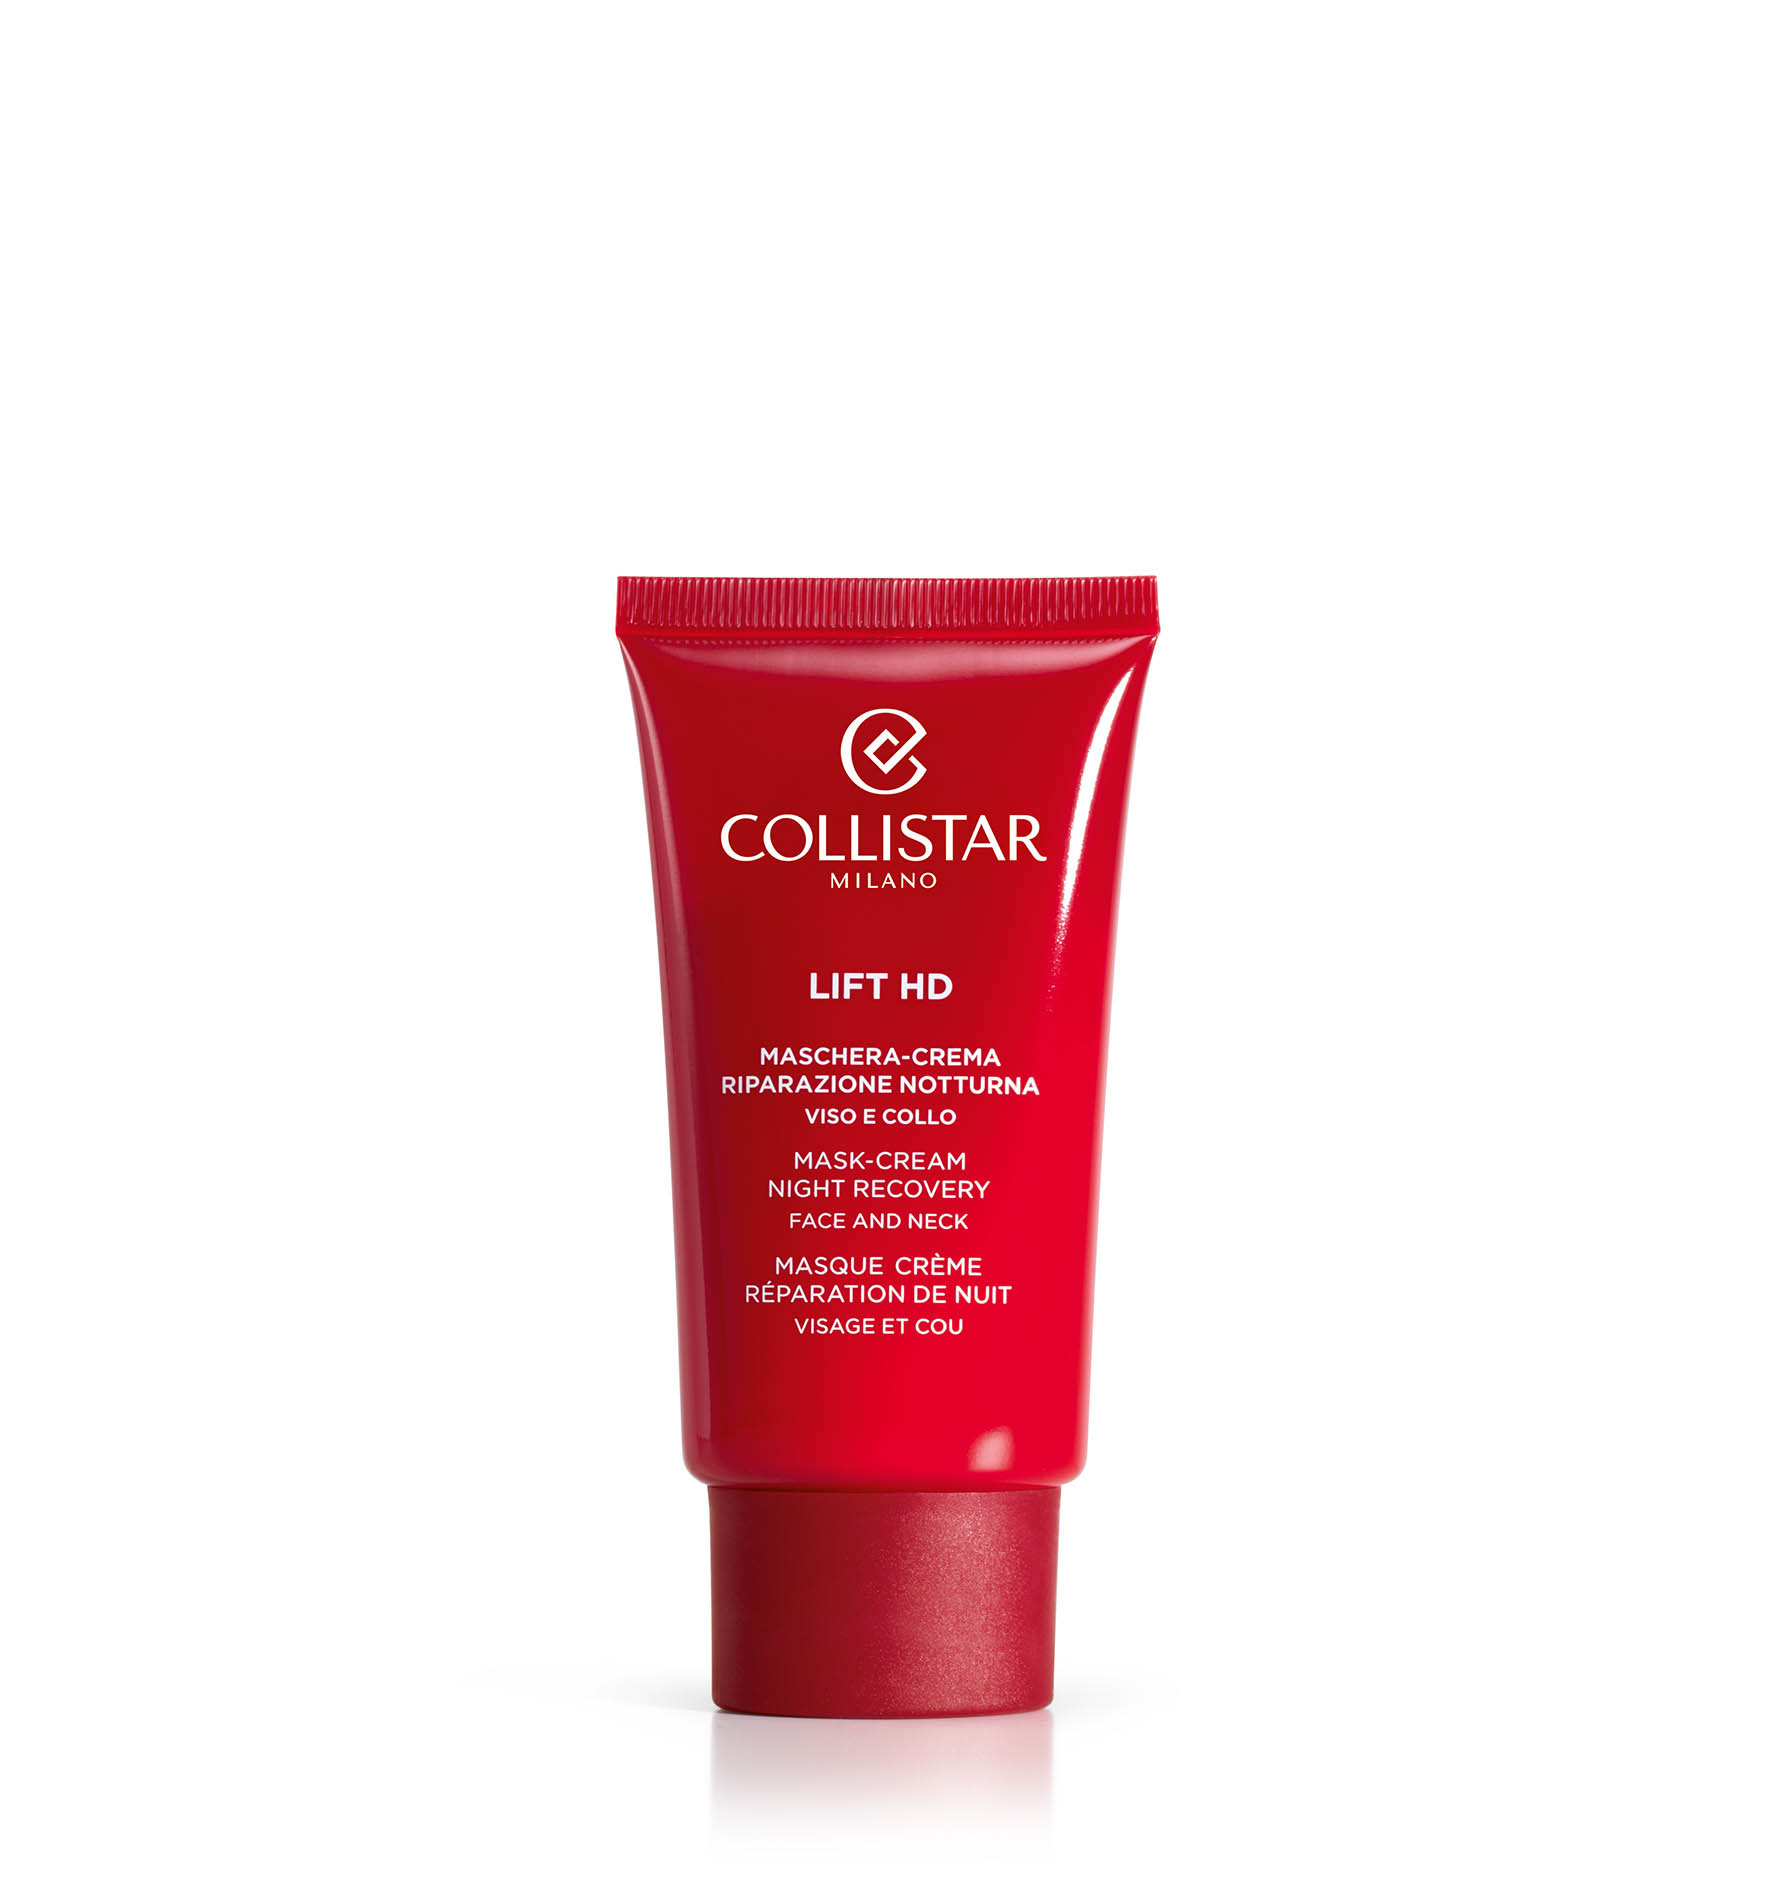 MASK-CREAM NIGHT RECOVERY FACE AND NECK - MEEST VERKOCHTE PRODUCTEN | Collistar - Shop Online Ufficiale